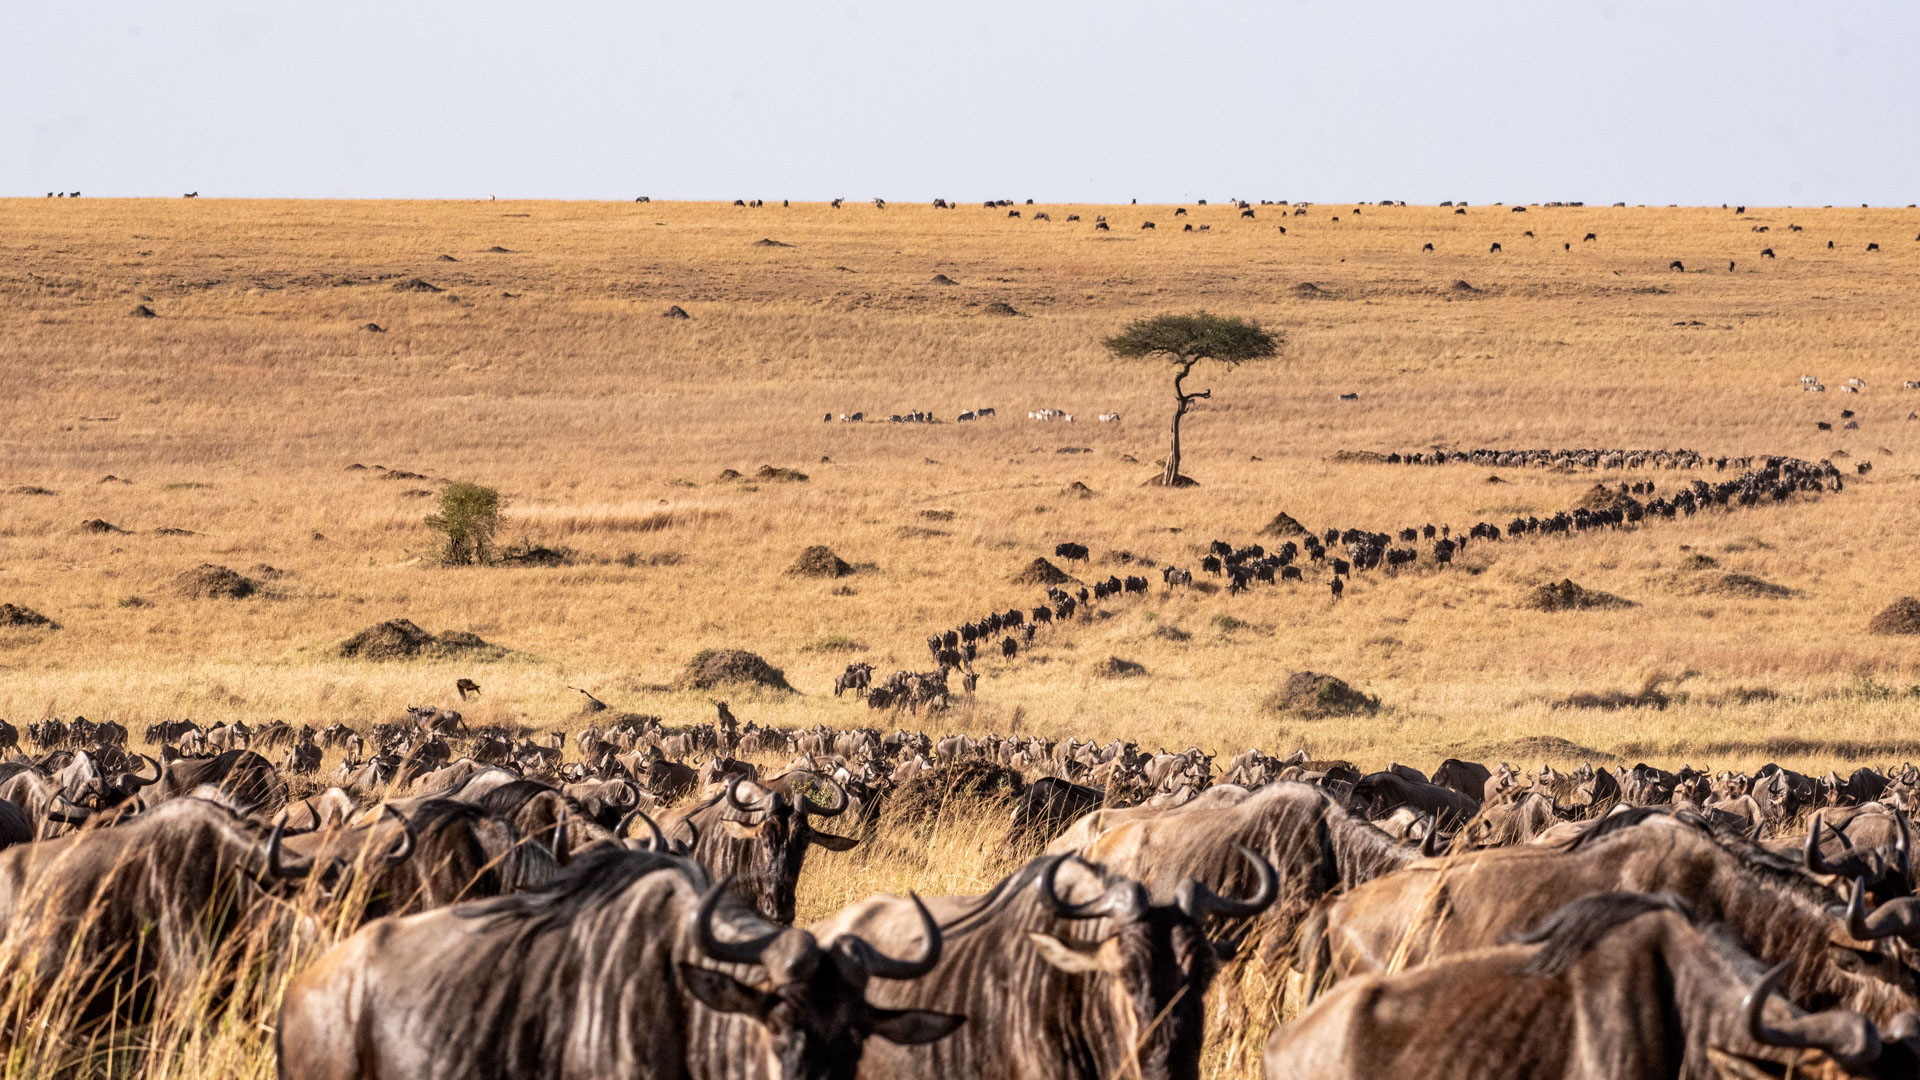 Above: Guide Titus Keteko and guests are swept up in the herd